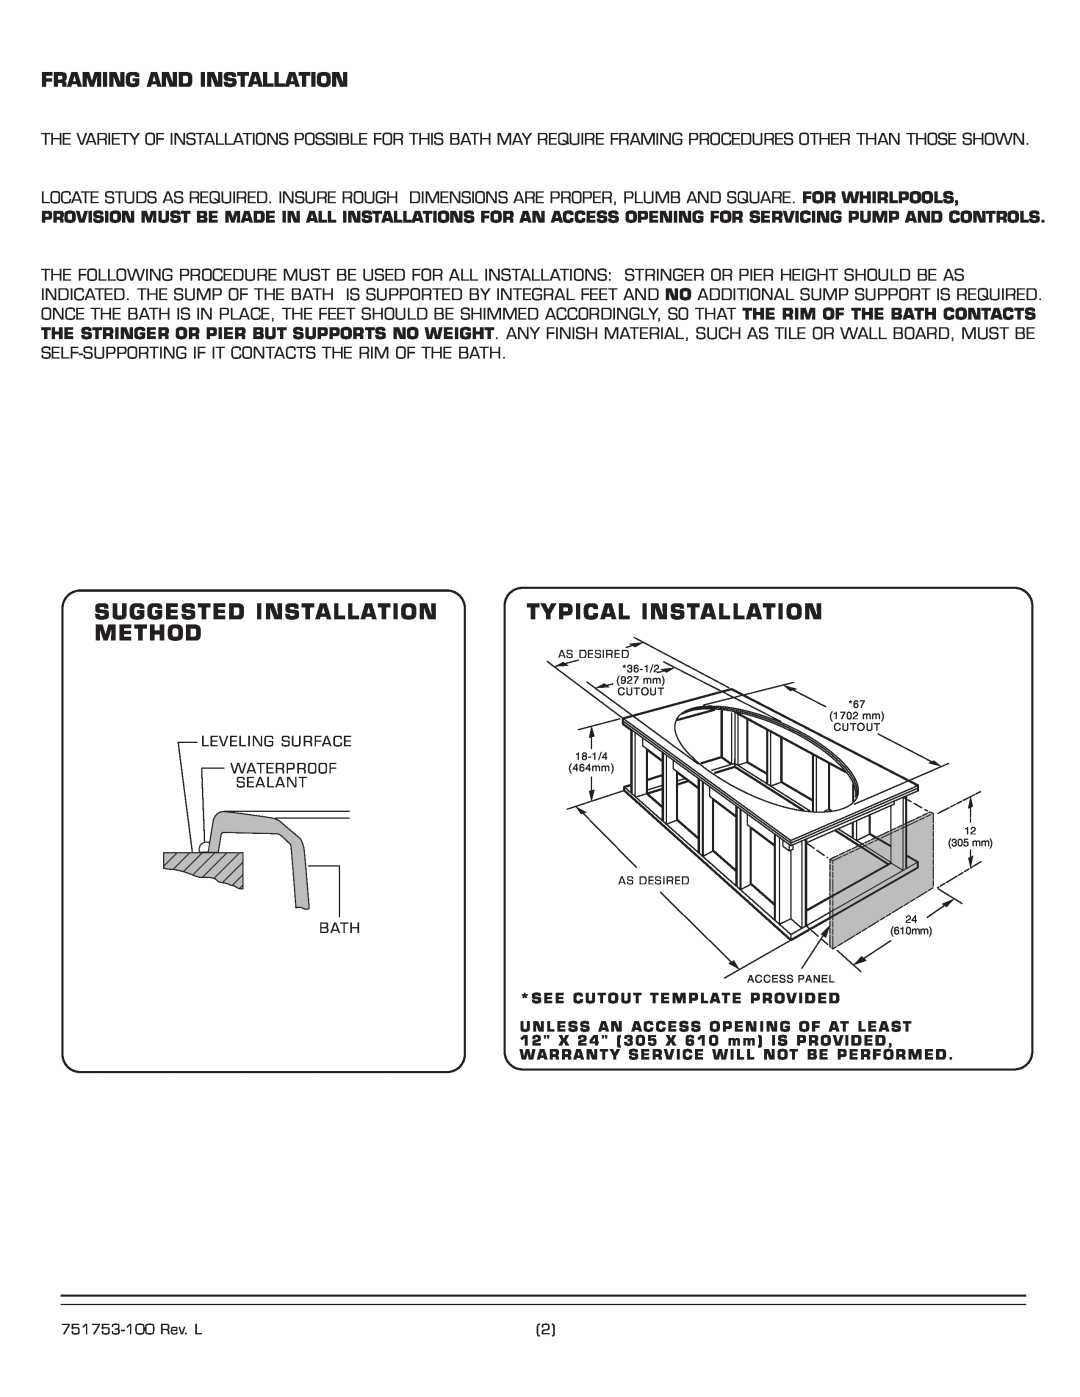 American Standard 2709 Suggested Installation Method, Typical Installation, Framing And Installation 